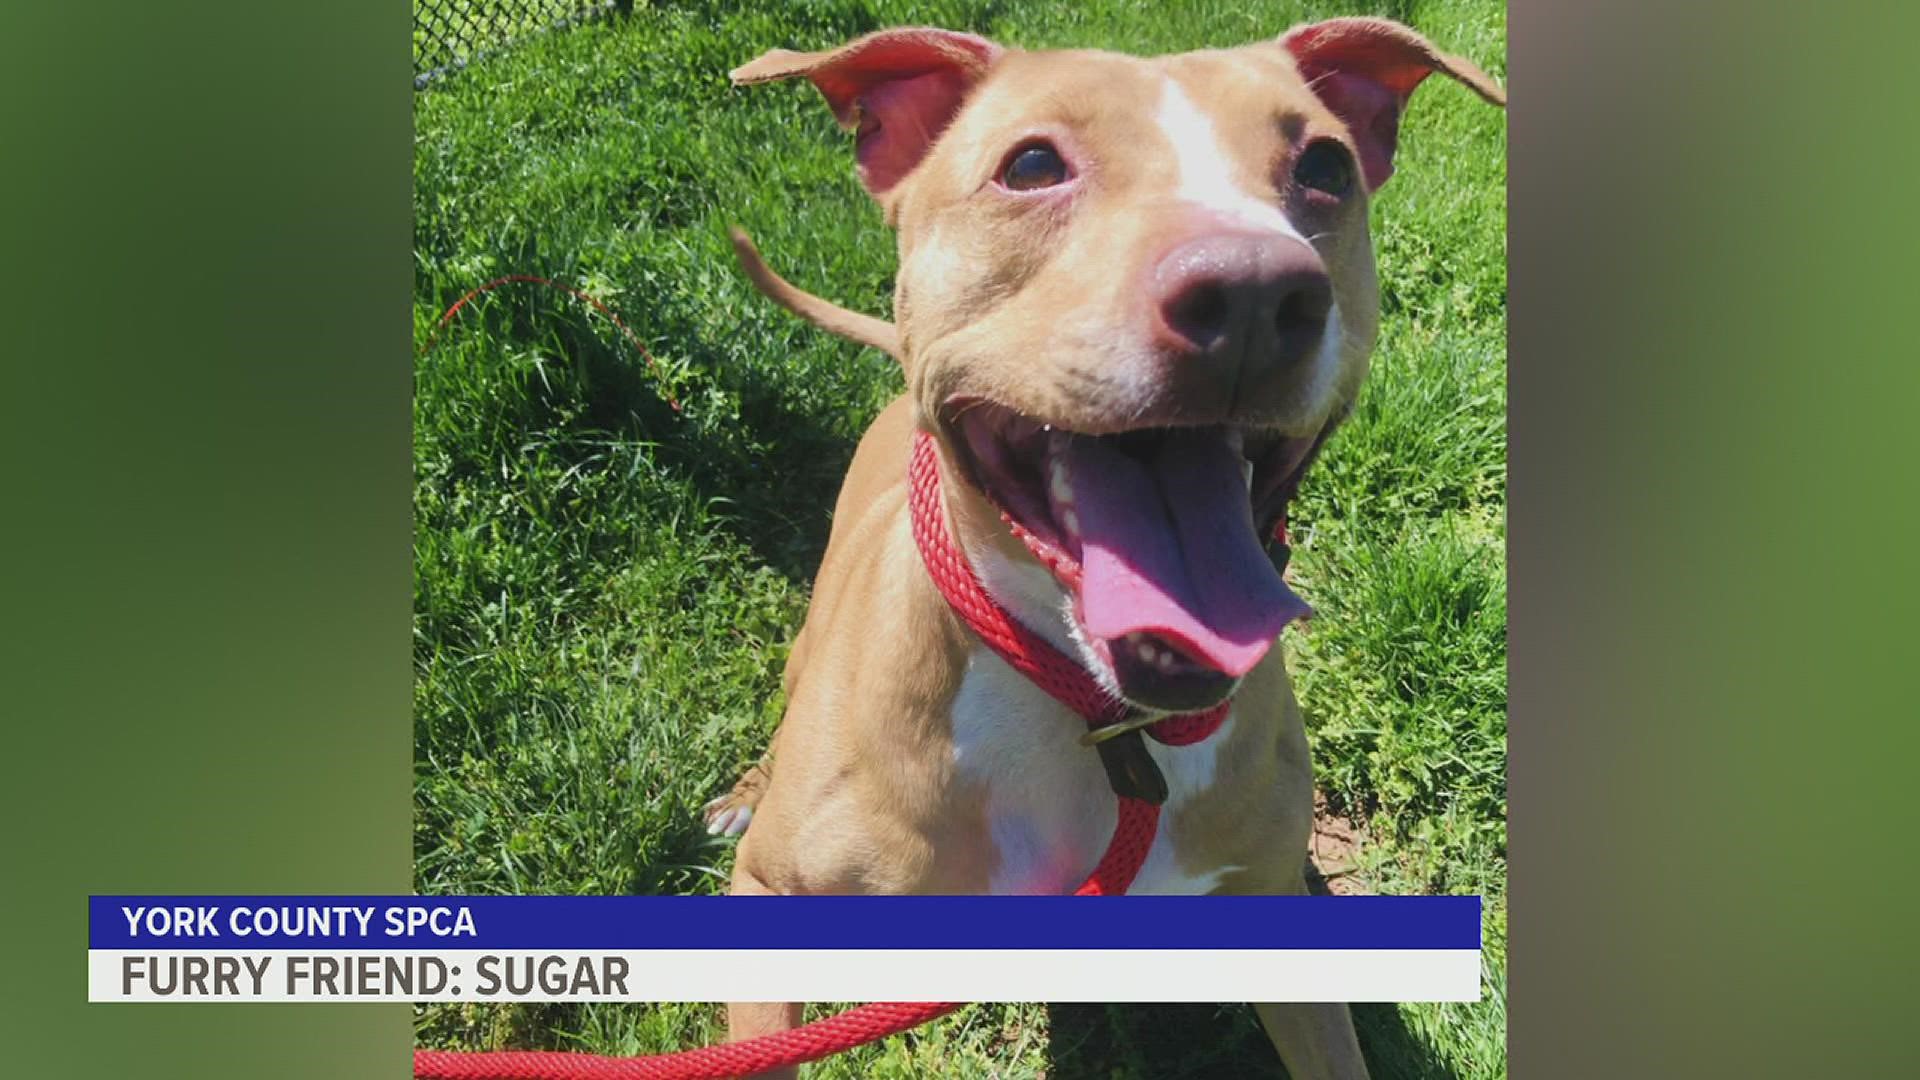 Sugar is a 5-year-old Pitbull who is "just as sweet as her name suggests, but can also be quite the diva," according to the shelter.